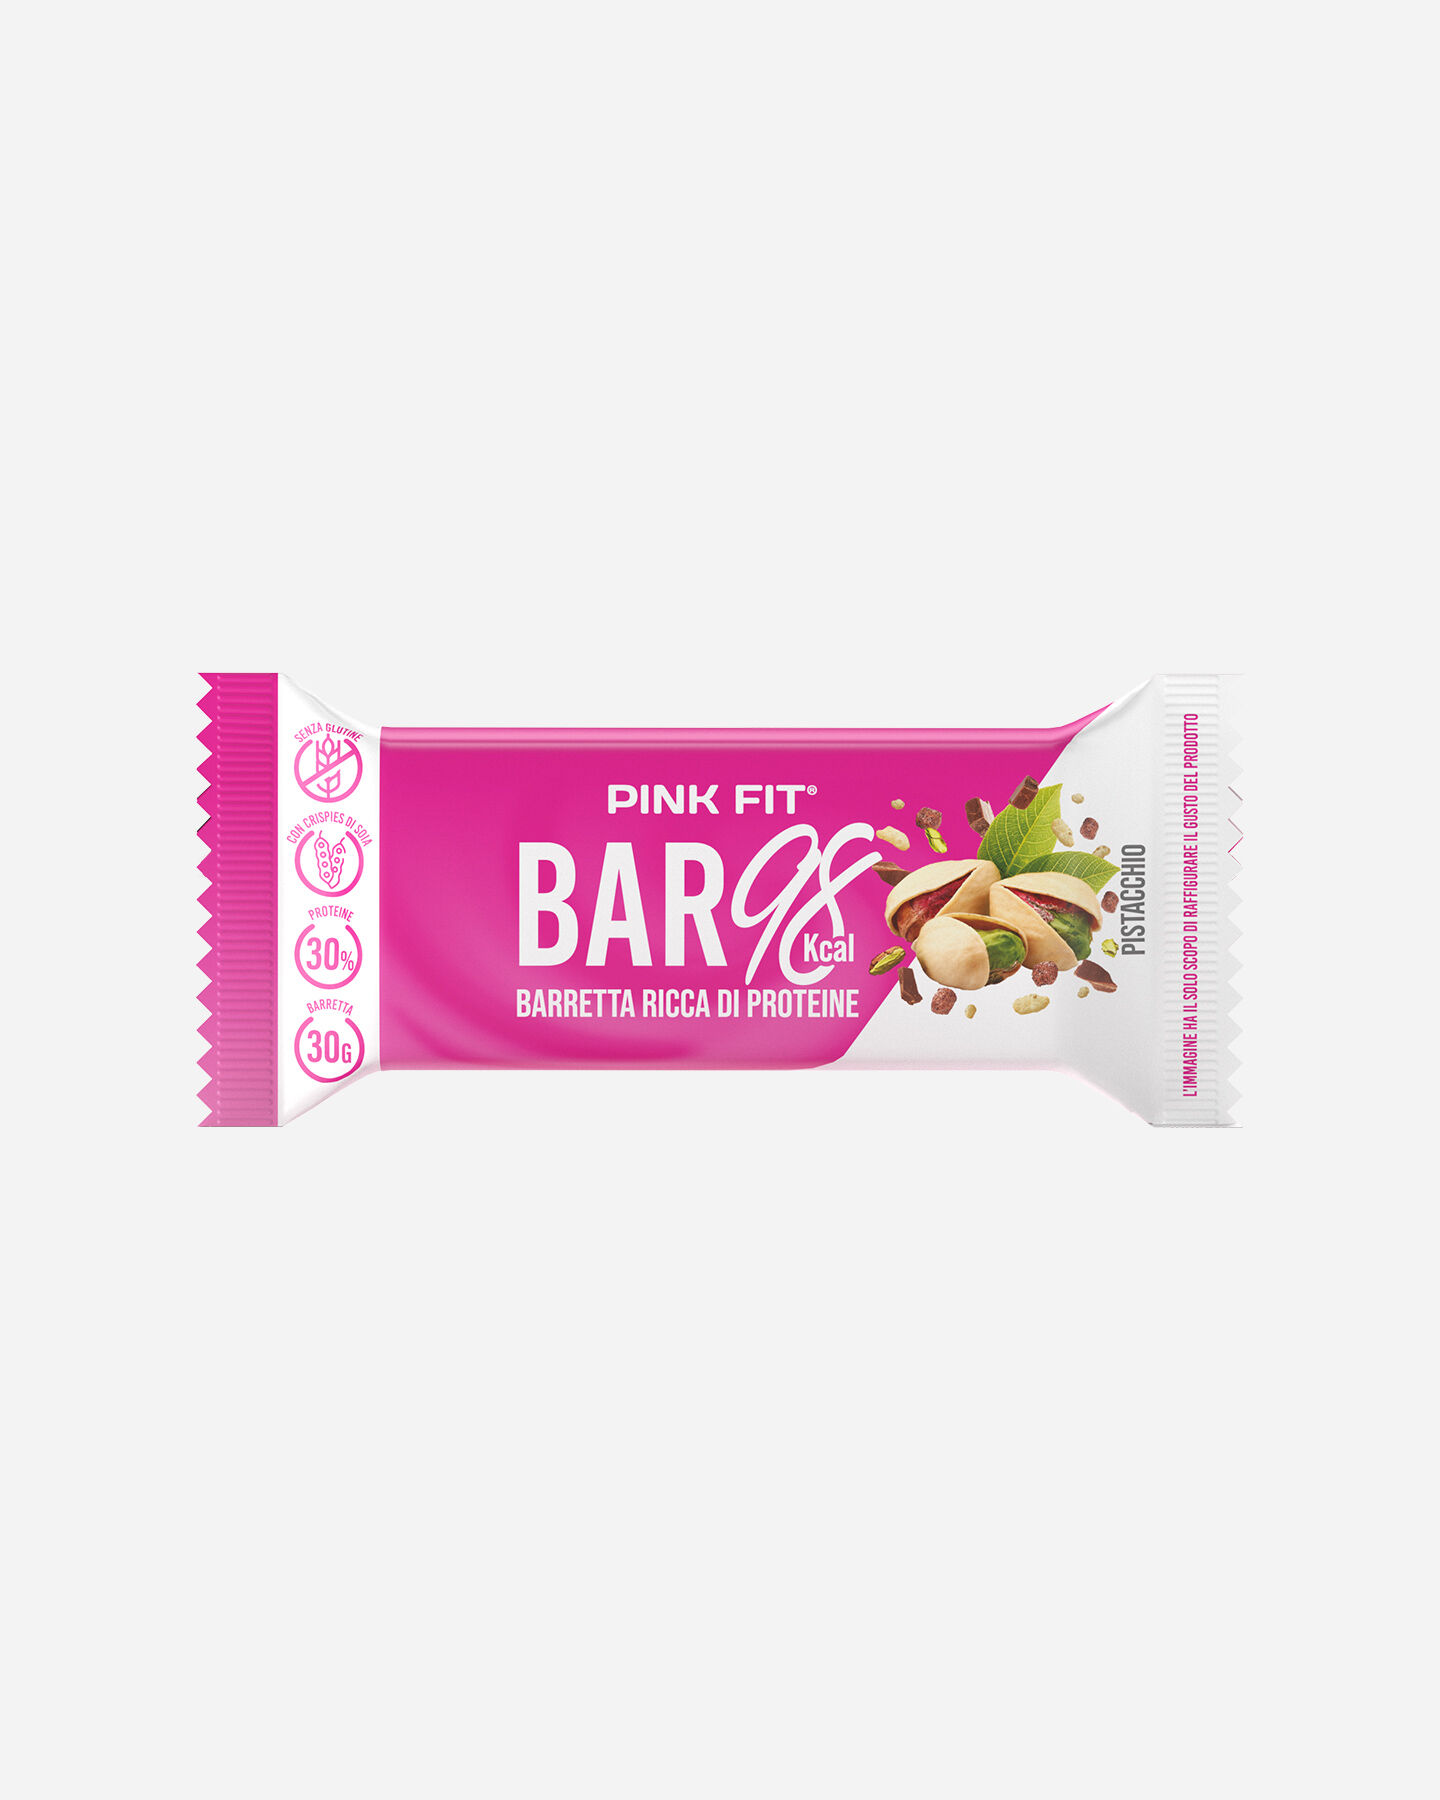  Energetico PROACTION PINK FIT BAR 98 PISTACCHIO 30 g  S4119234|1|UNI scatto 0